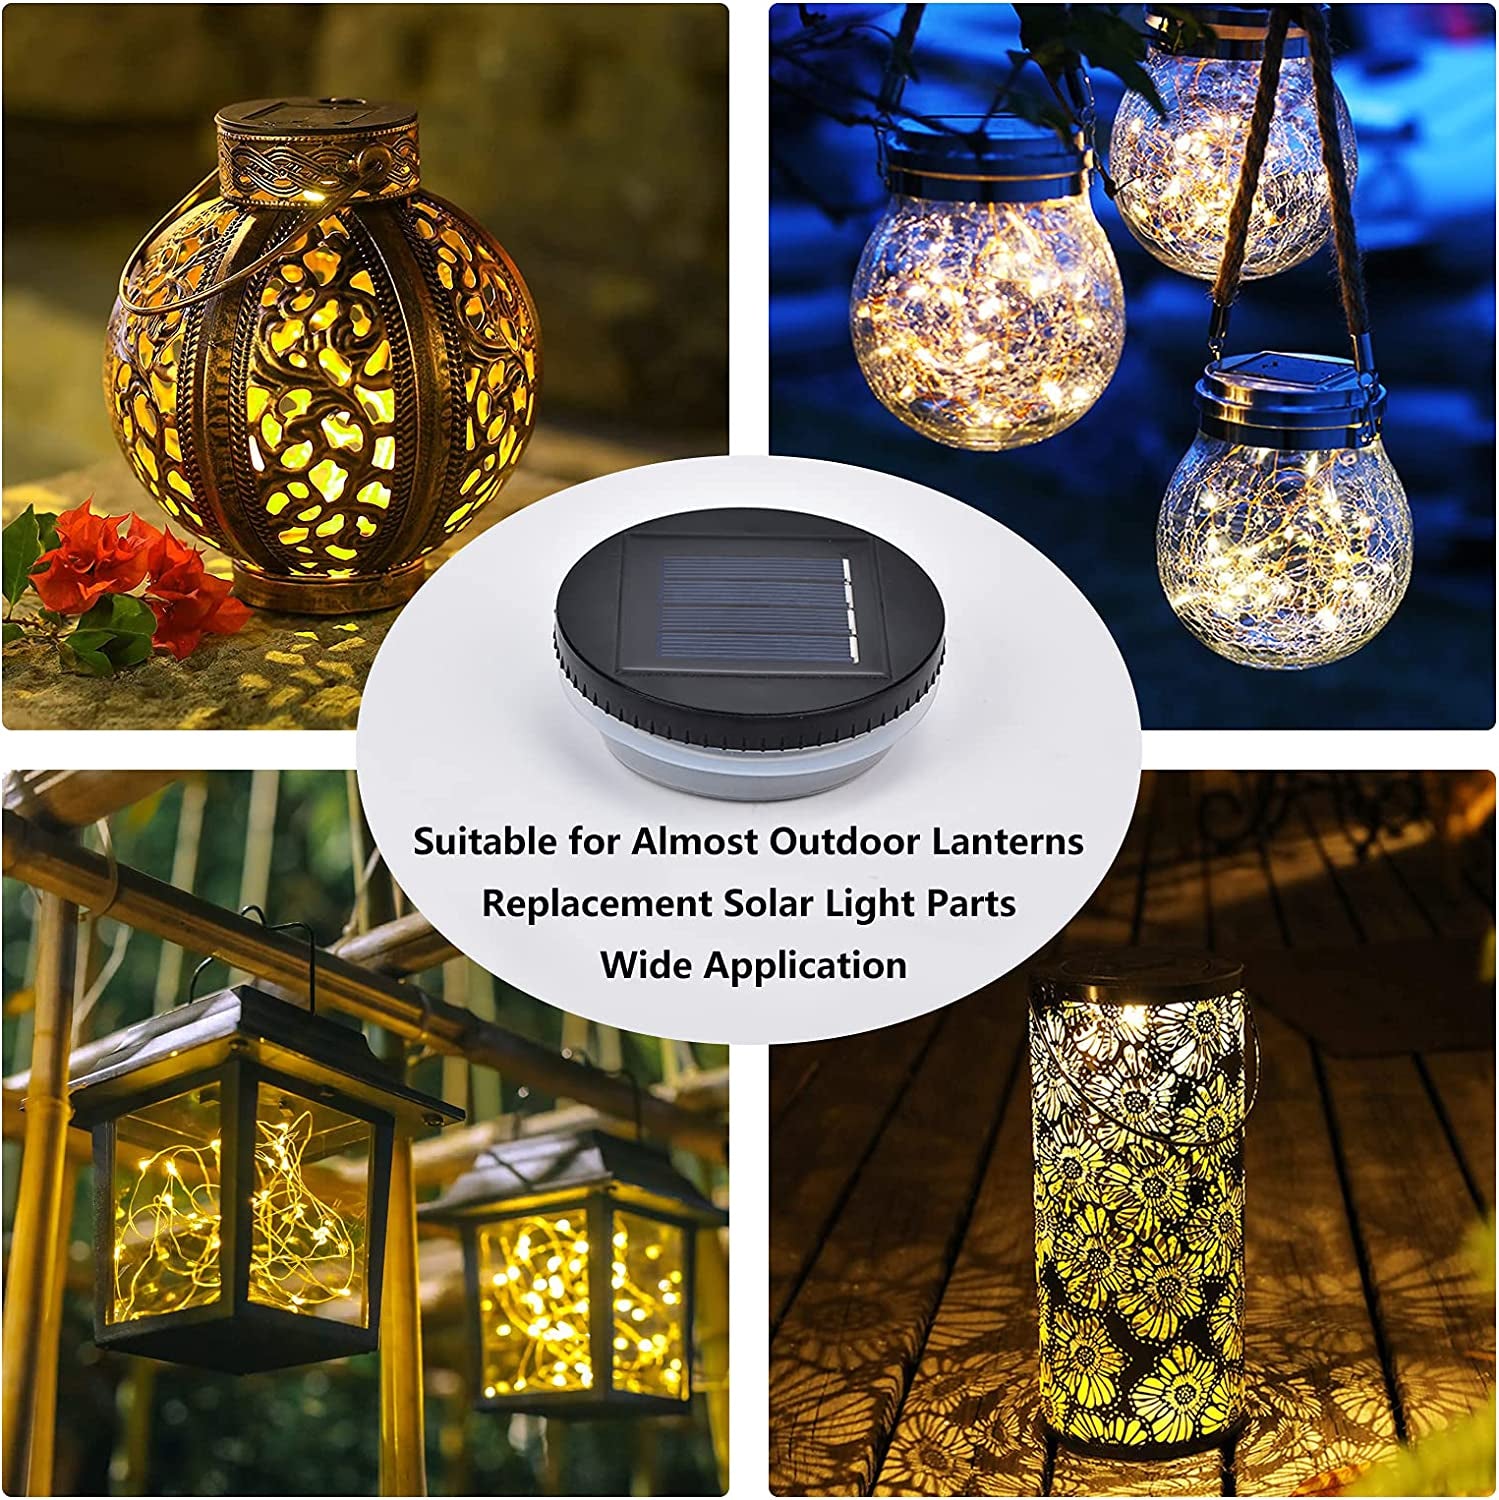 6 Packs Solar Lights Replacement Top,3.15 in Silicone Edge Solar Lids Lights 2* Colorful Lights 4*Warm White LED Light Replacement Solar Light Parts with Hanging Rope